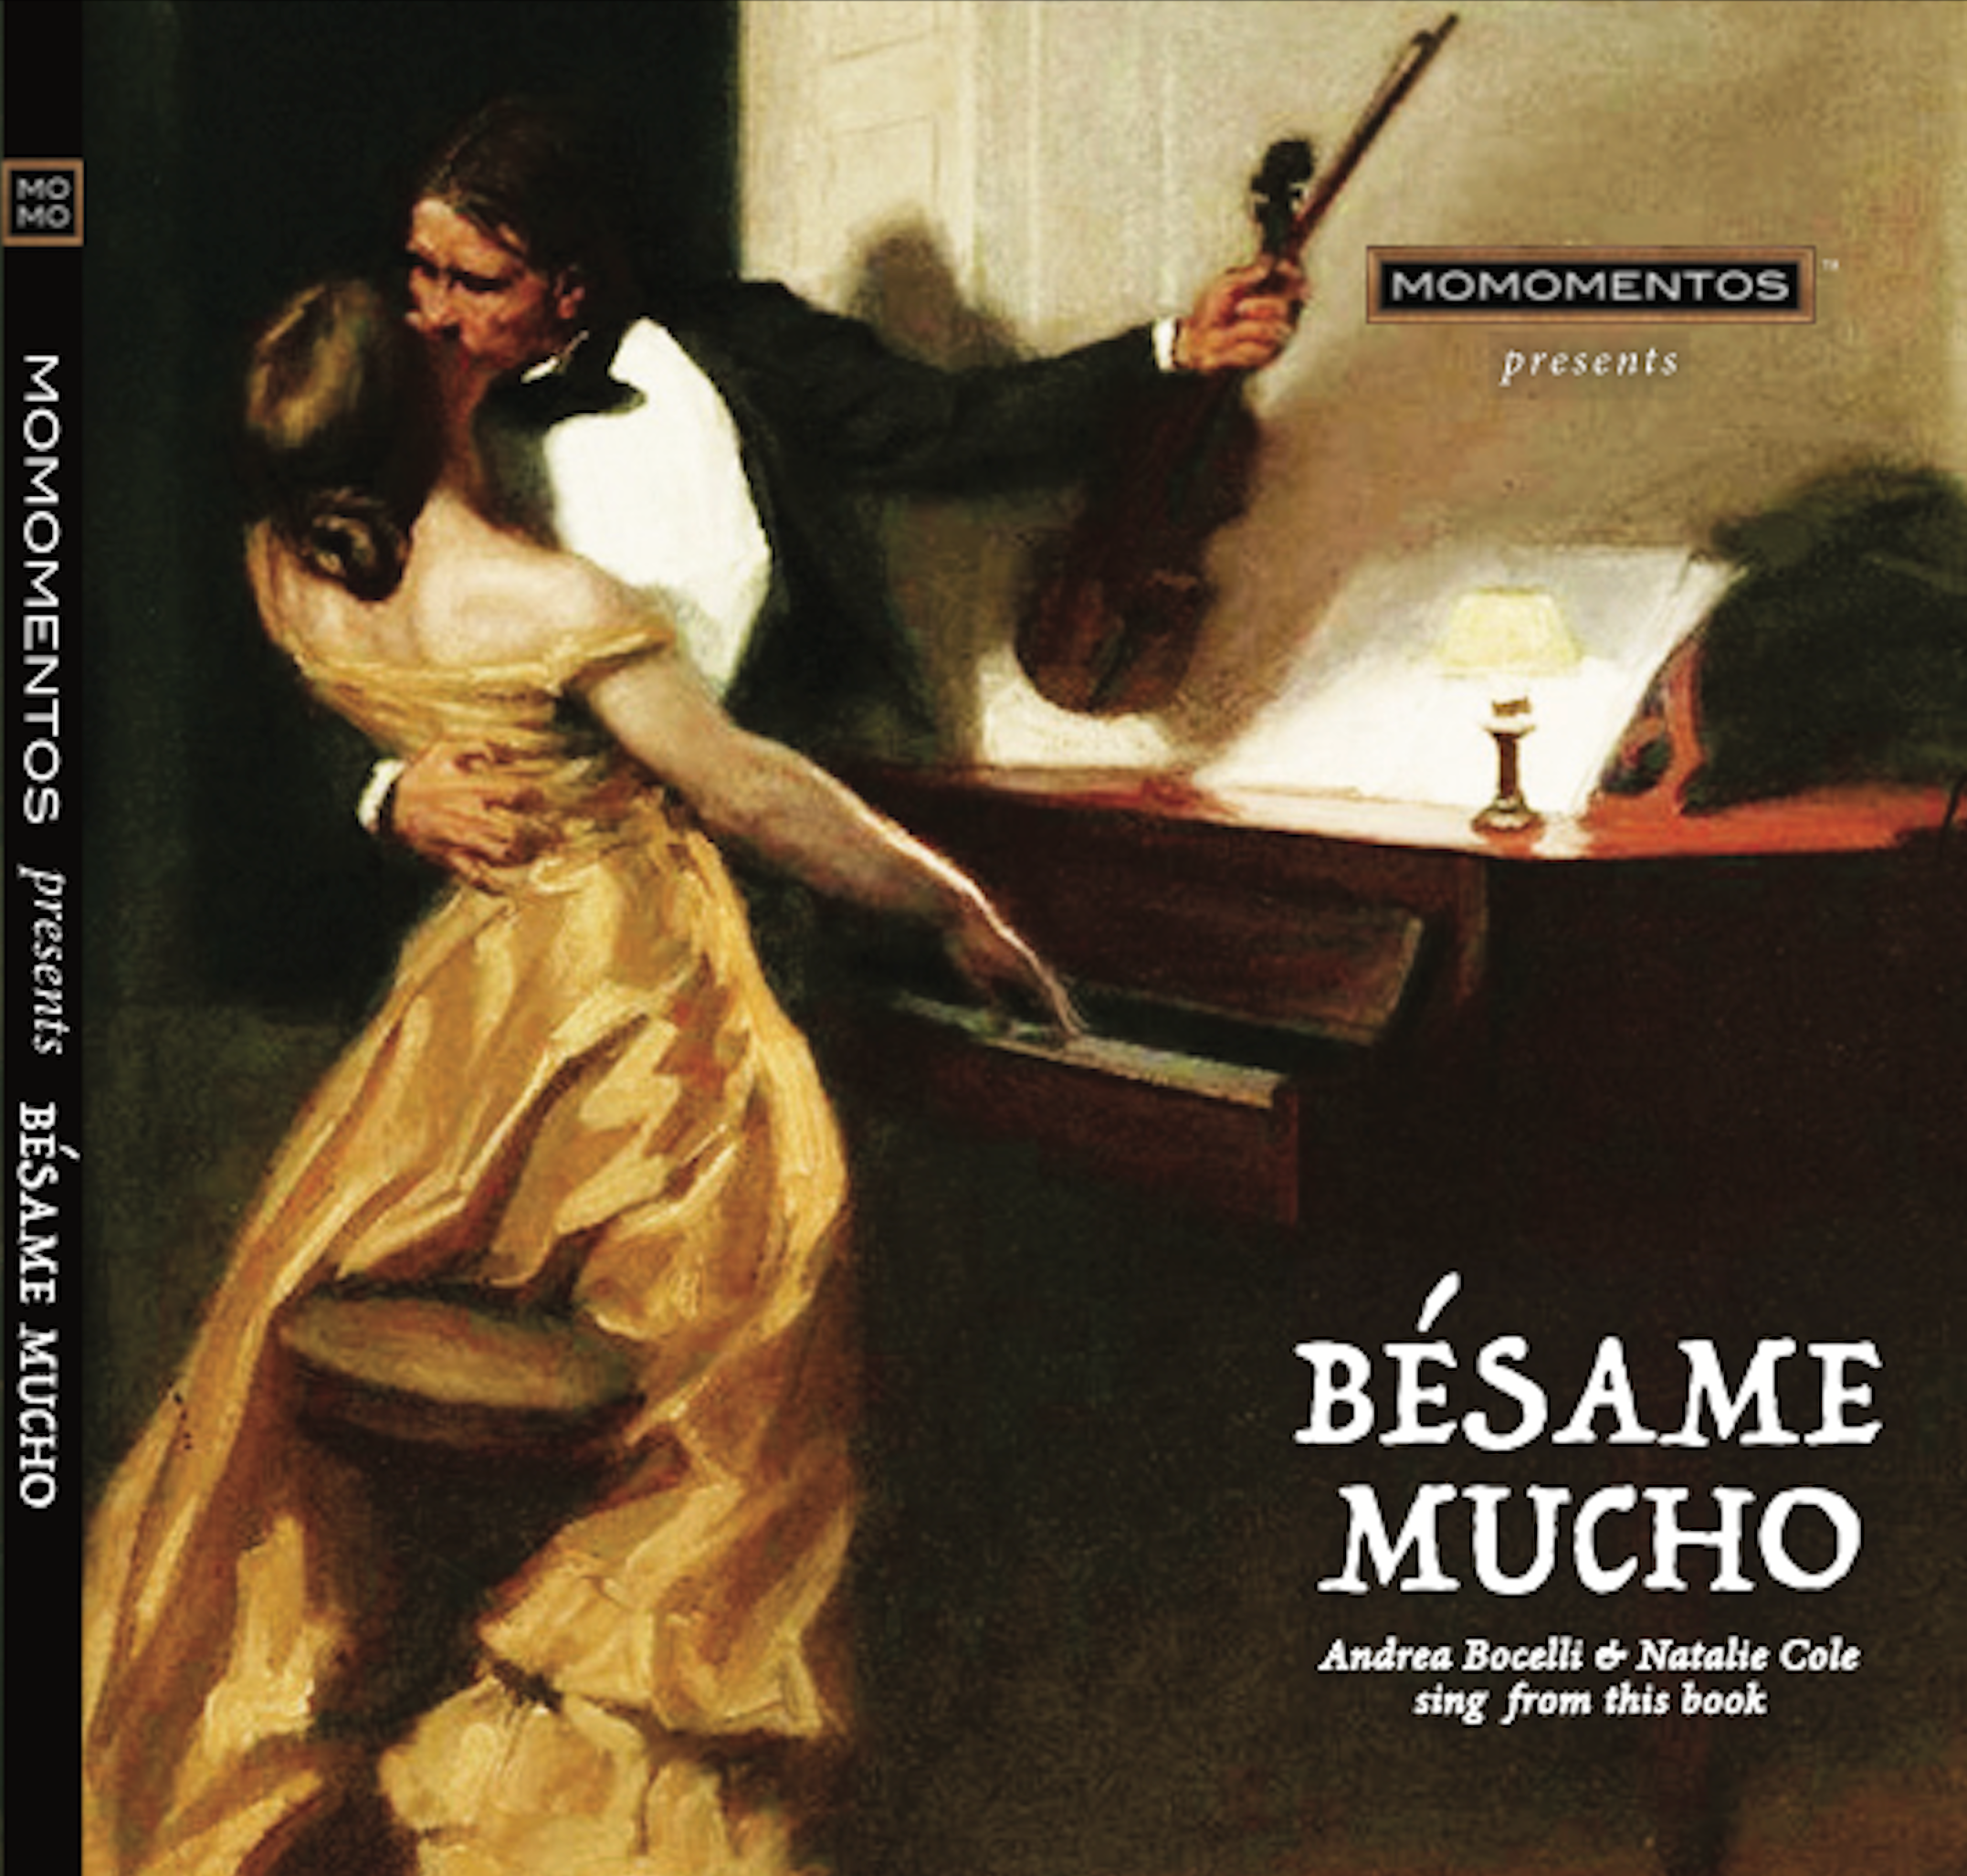 BESAME MUCHO sung by Andrea Bocelli & Natalie Cole inside this Gift Book